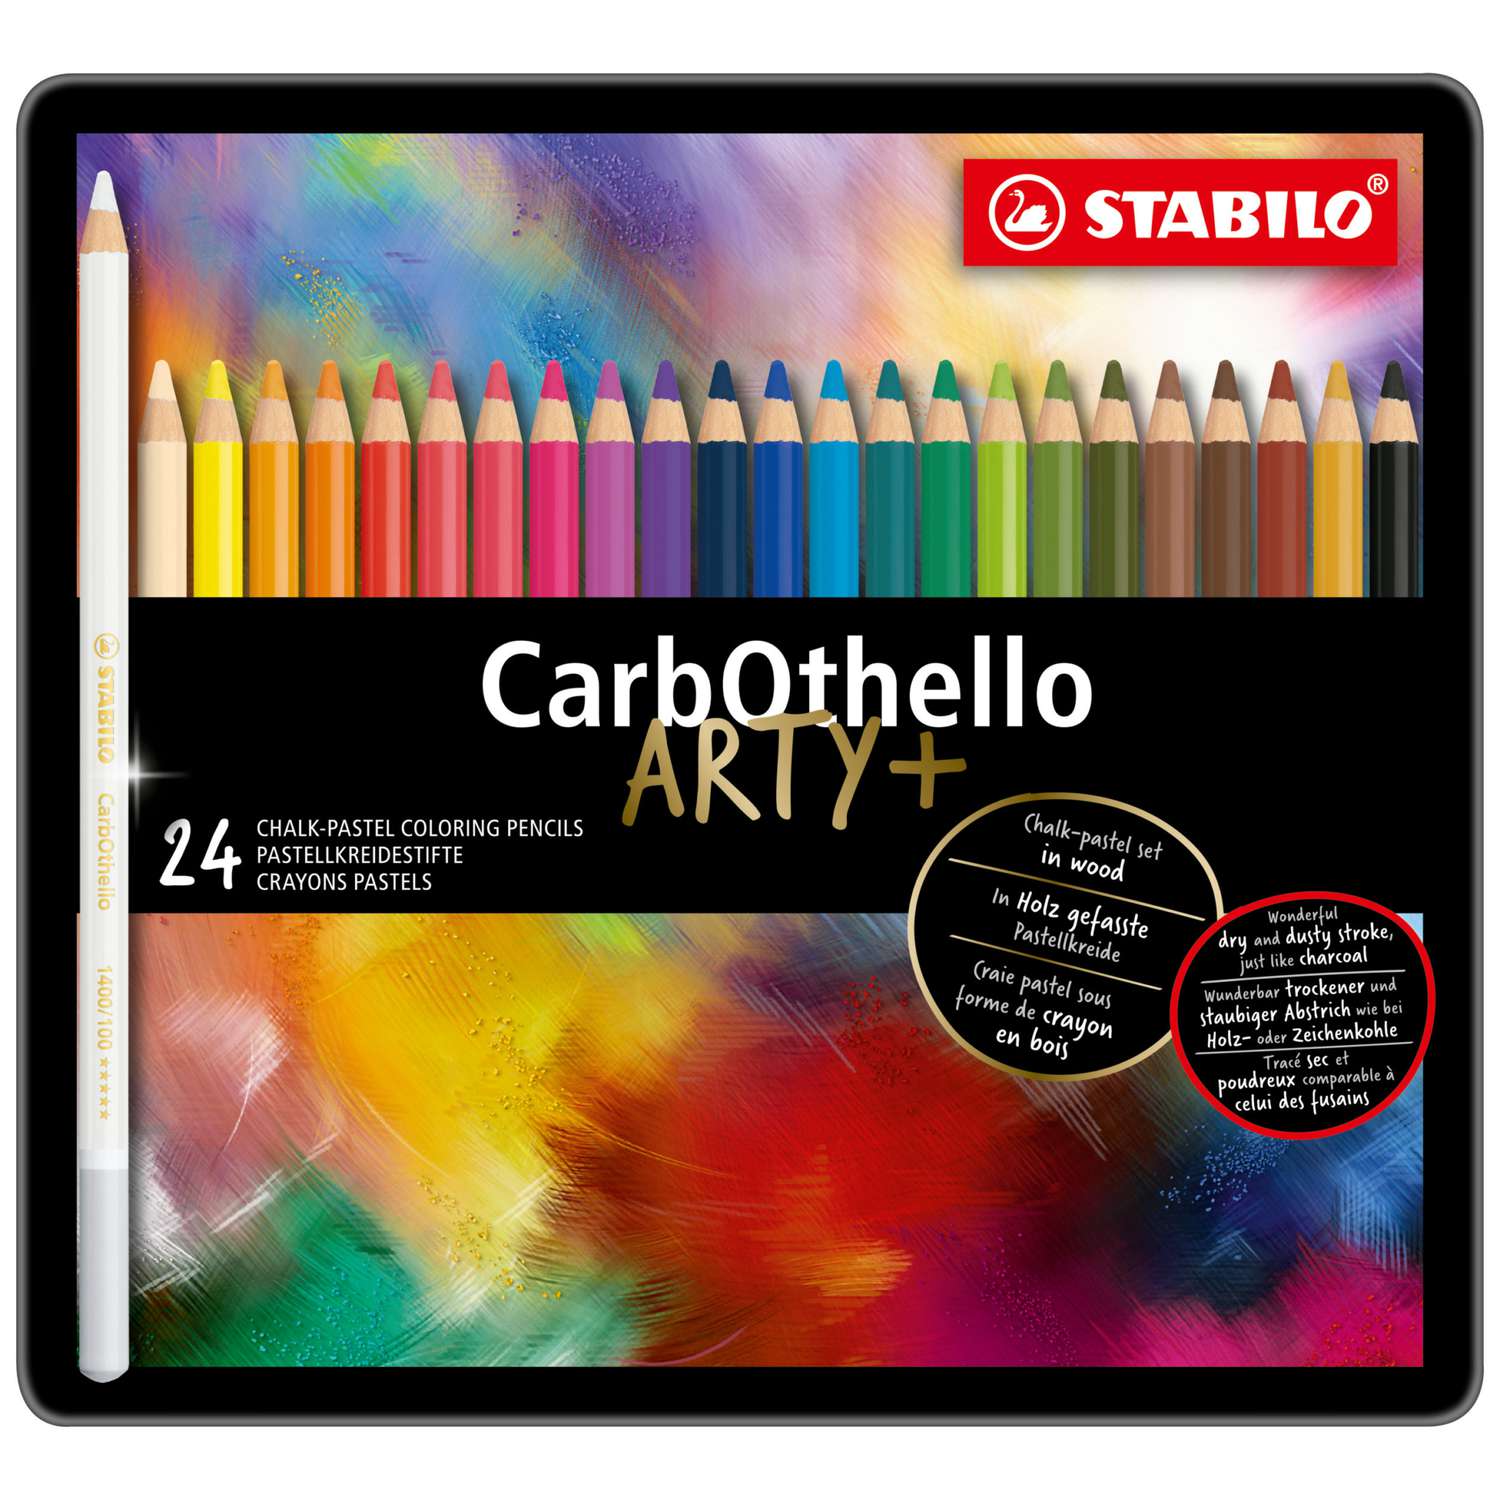 https://images.greatart.co.uk/out/pictures/generated/1500_1500/596255/Stabilo+CarbOthello+Pastel+Pencil+Tins%2C+24+pencils.jpg